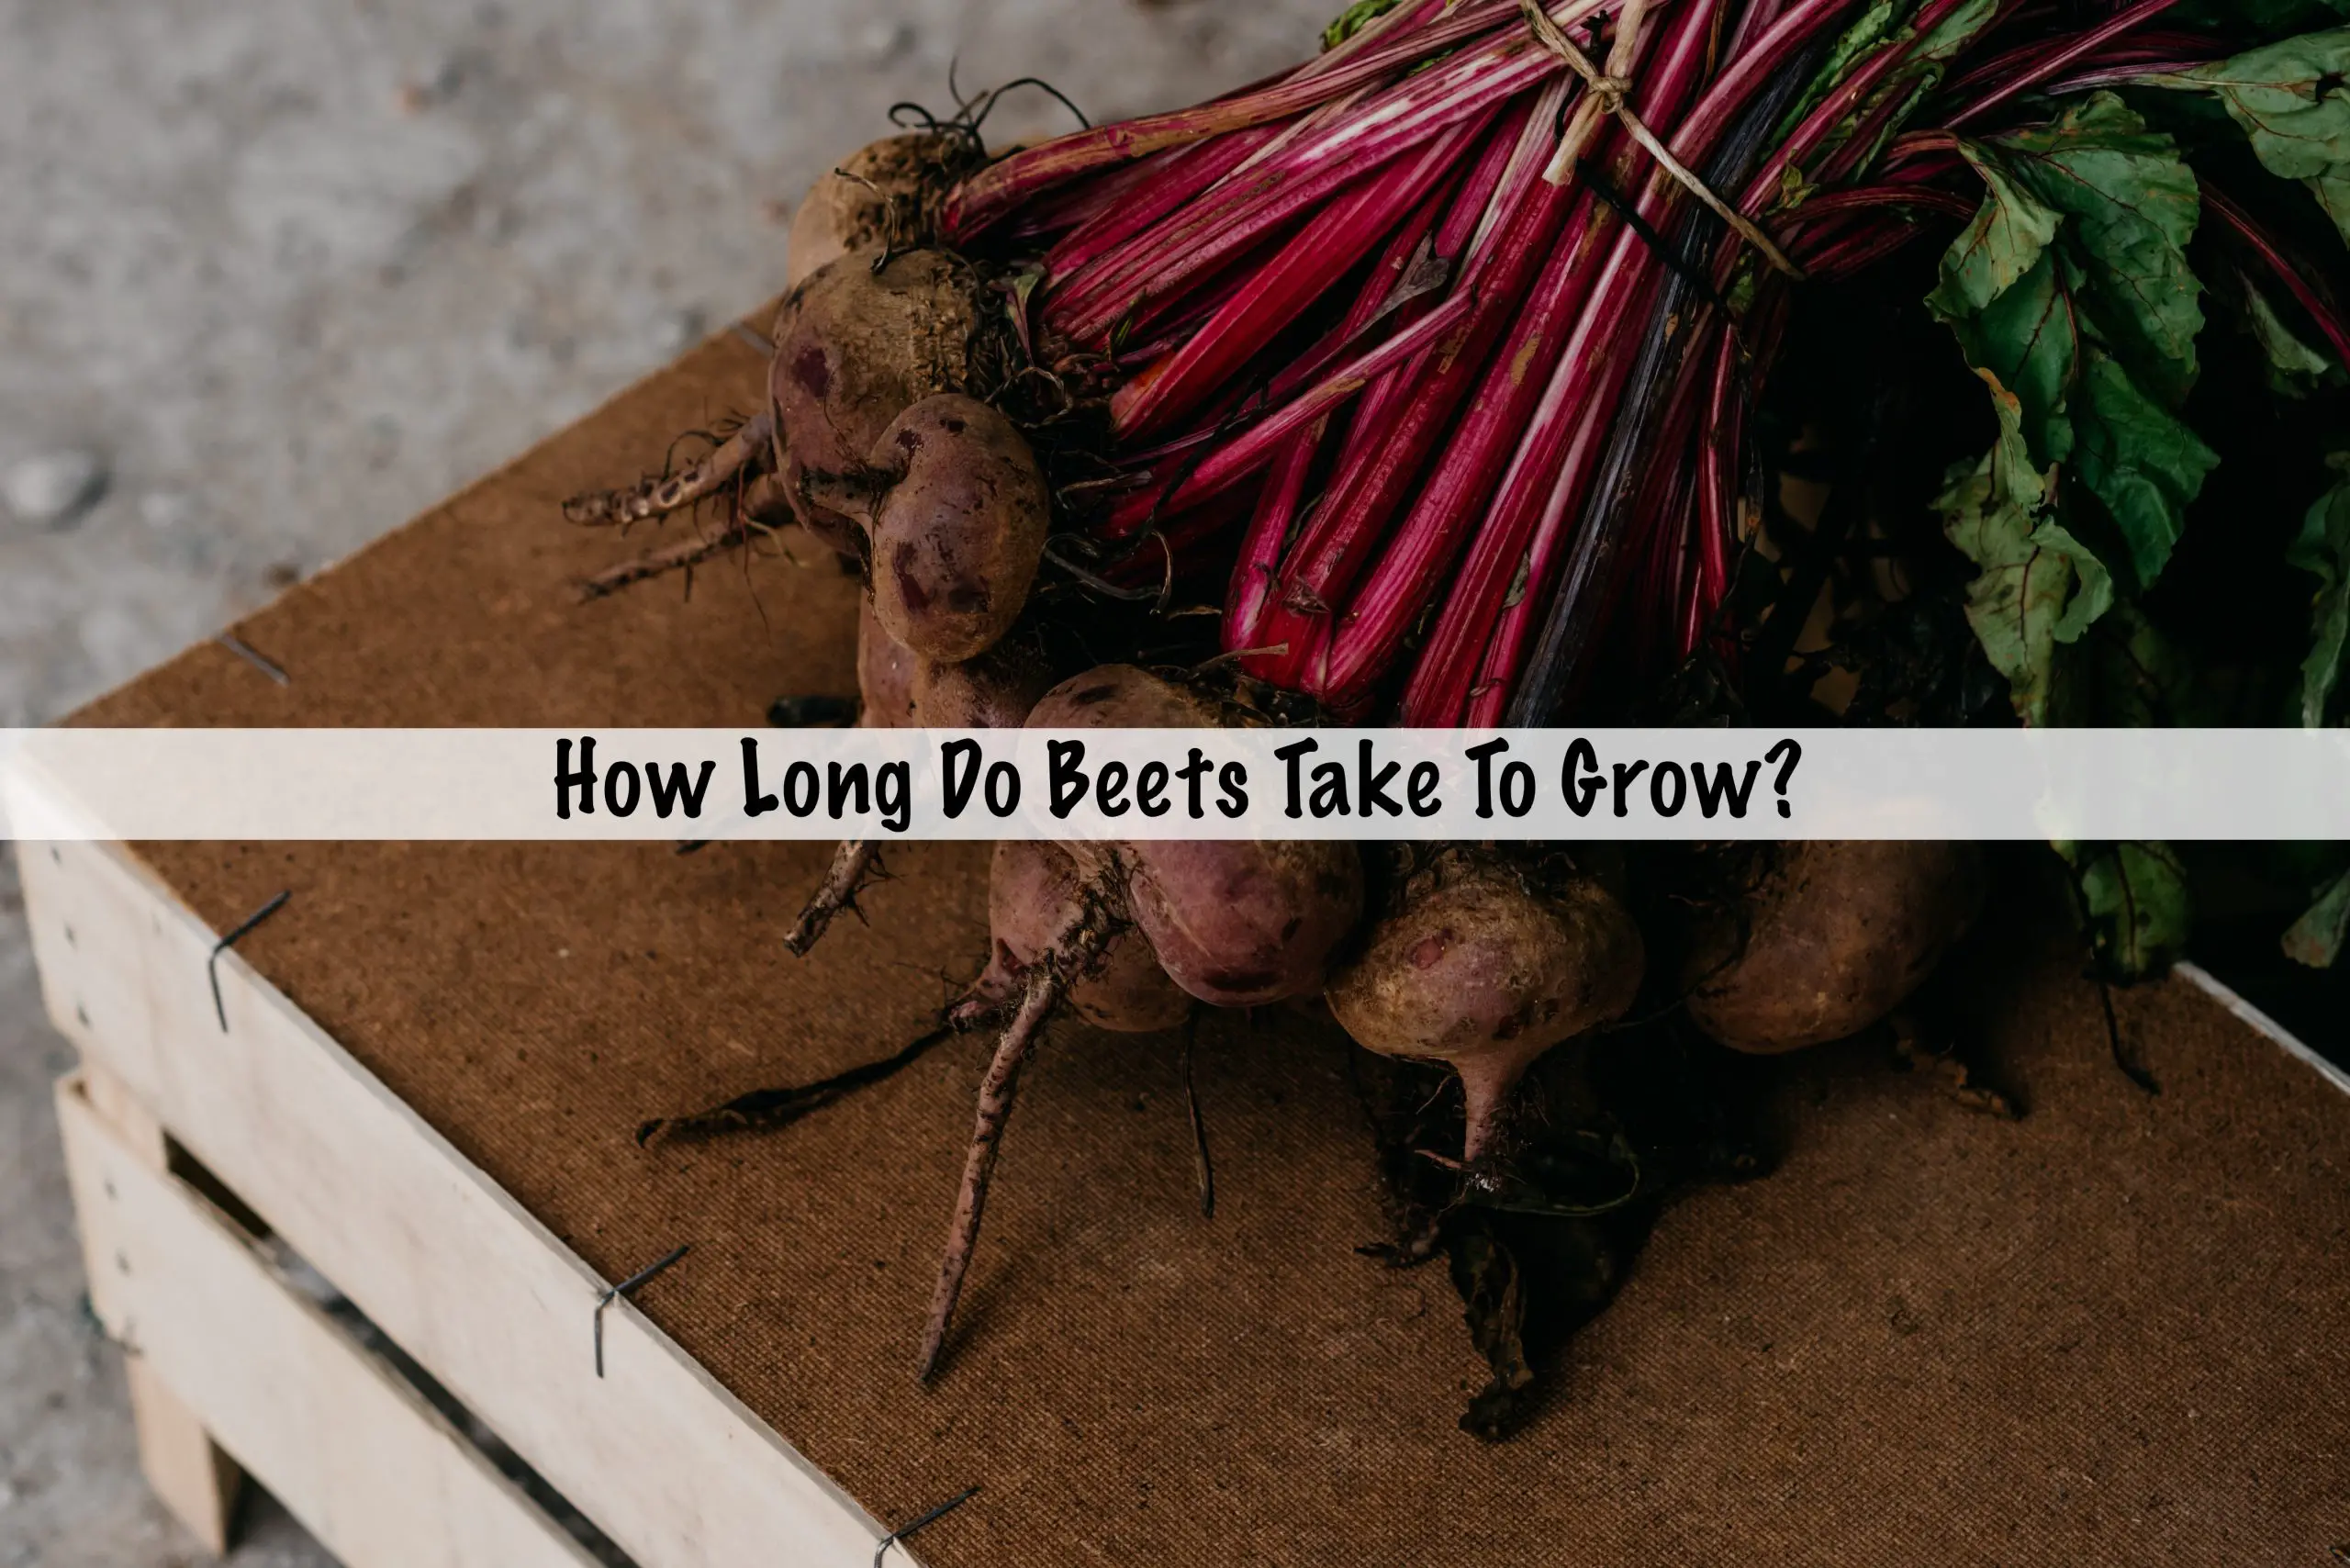 How Long Do Beets Take To Grow?